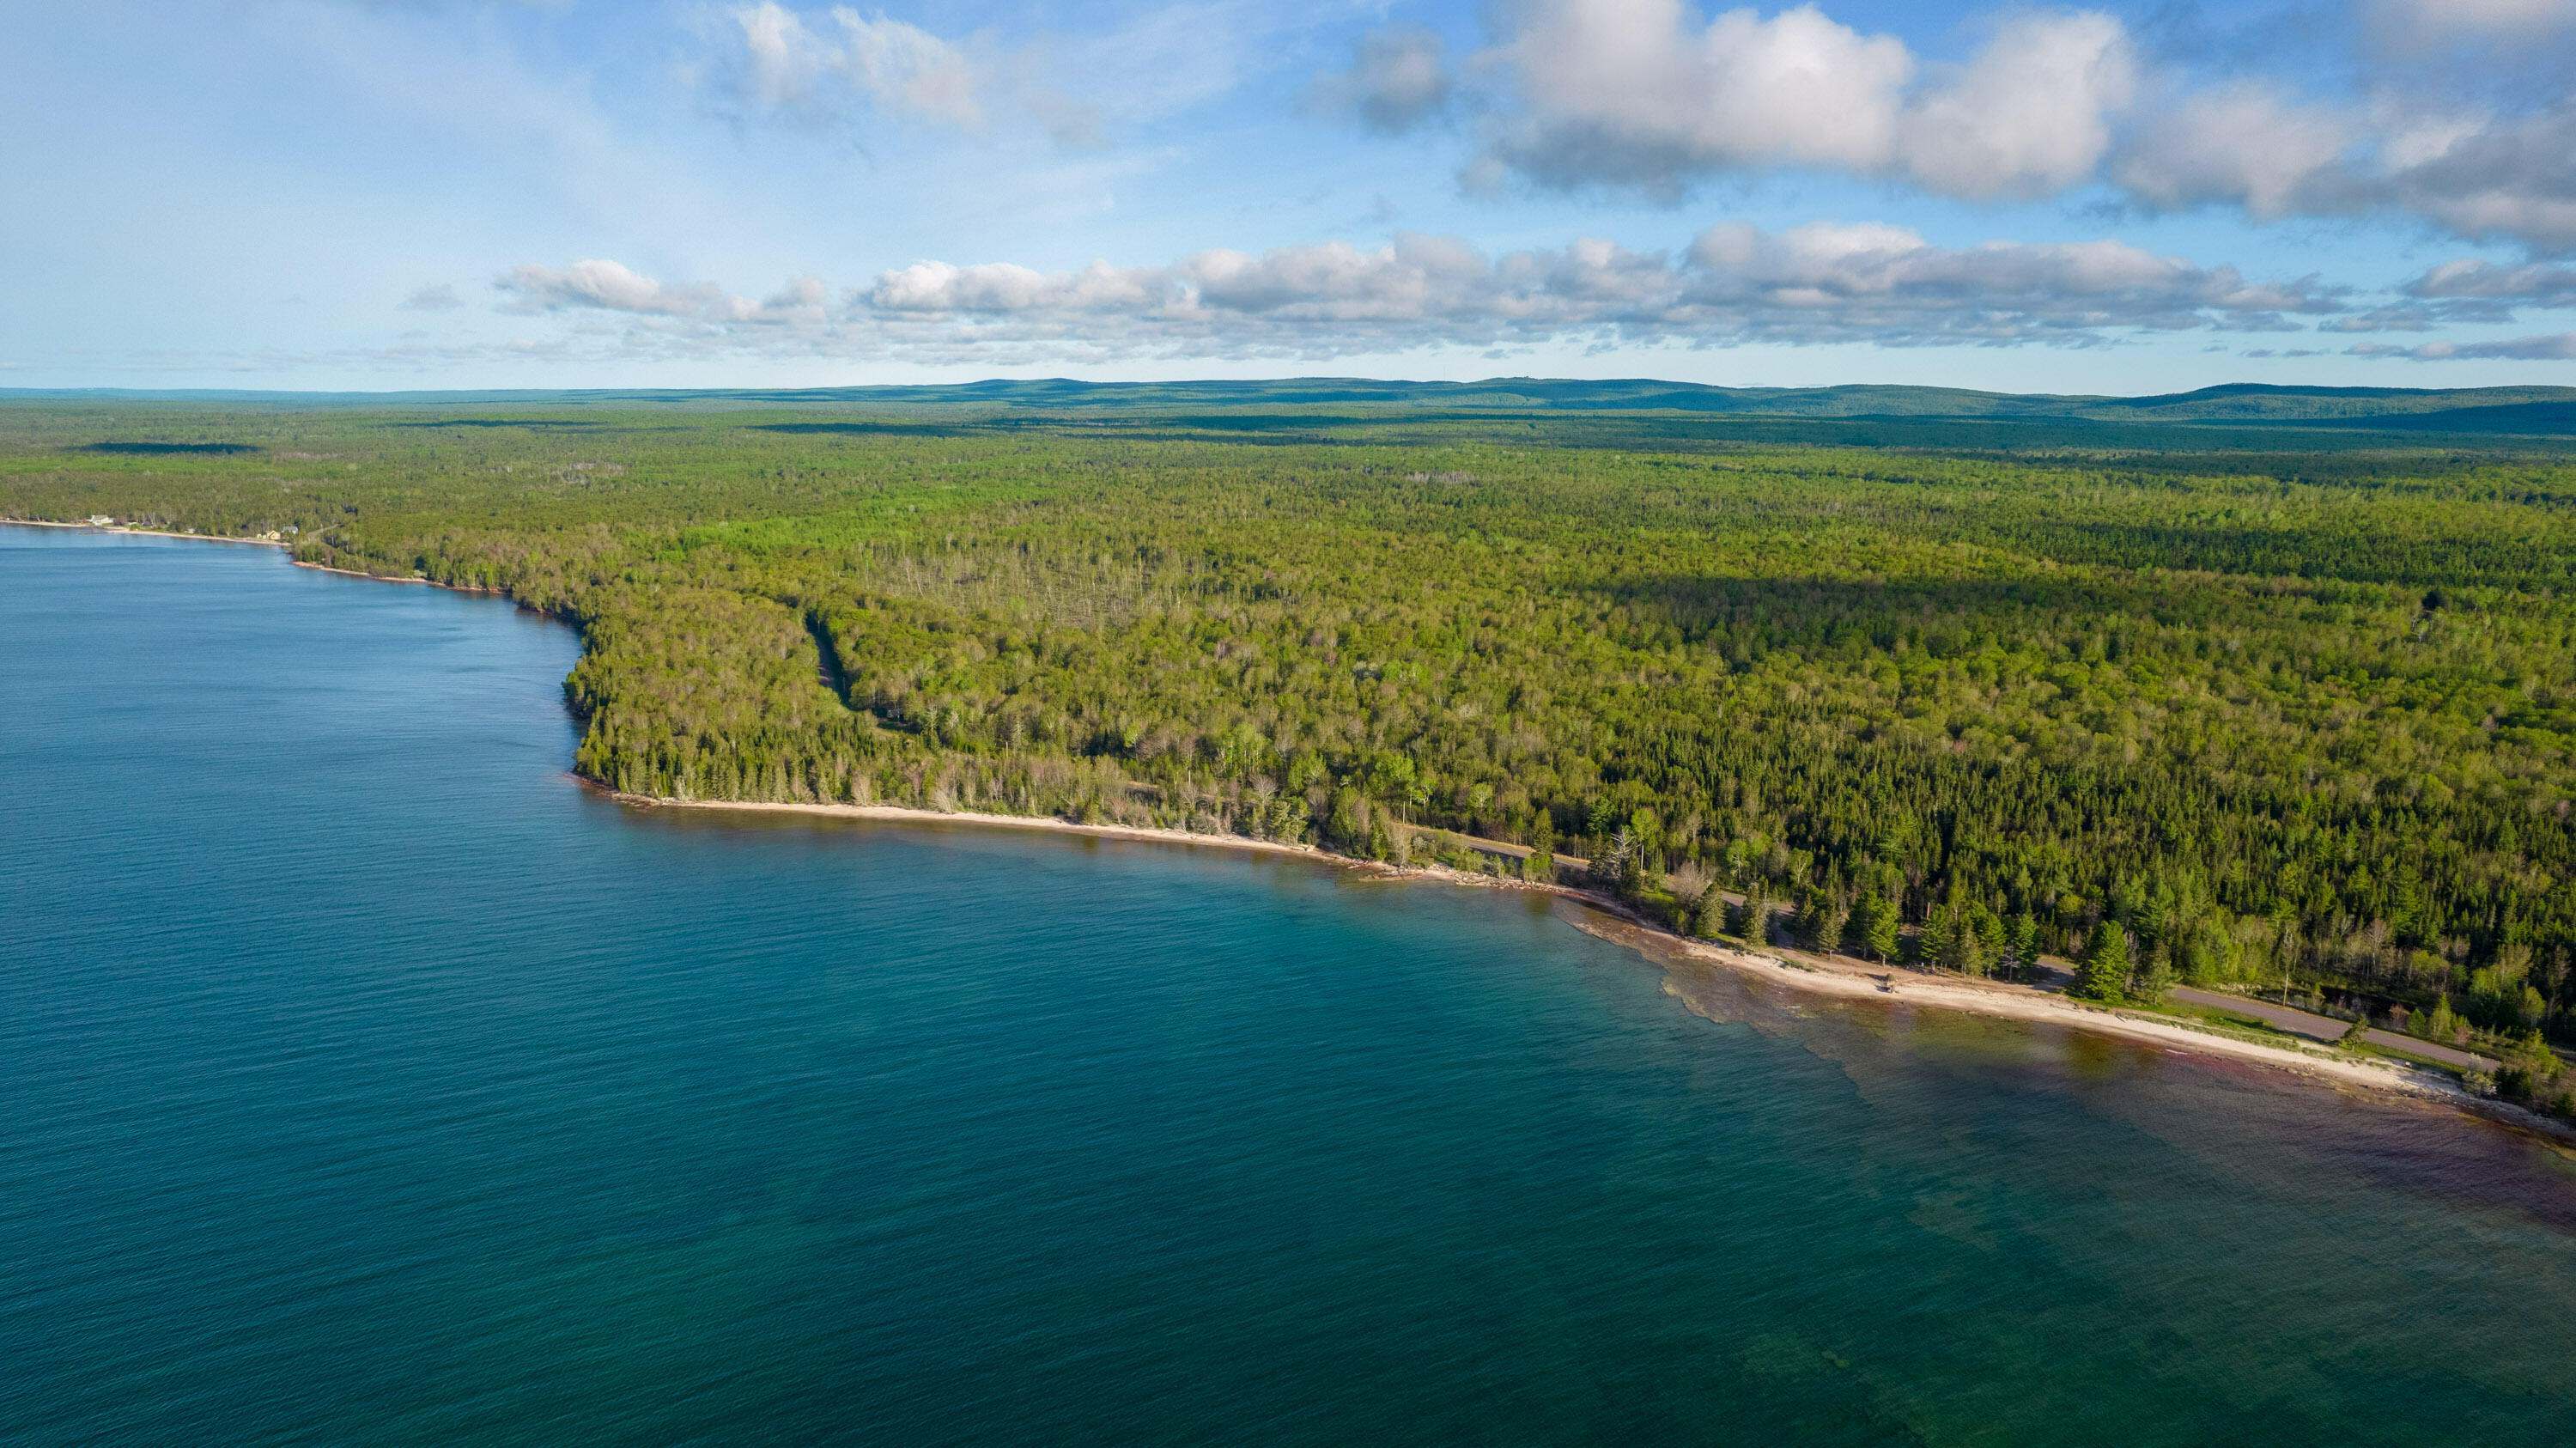 The Little Betsy Shoreline in the Keweenaw Peninsula. The water of Lake Superior is blue and the sky is clear. 